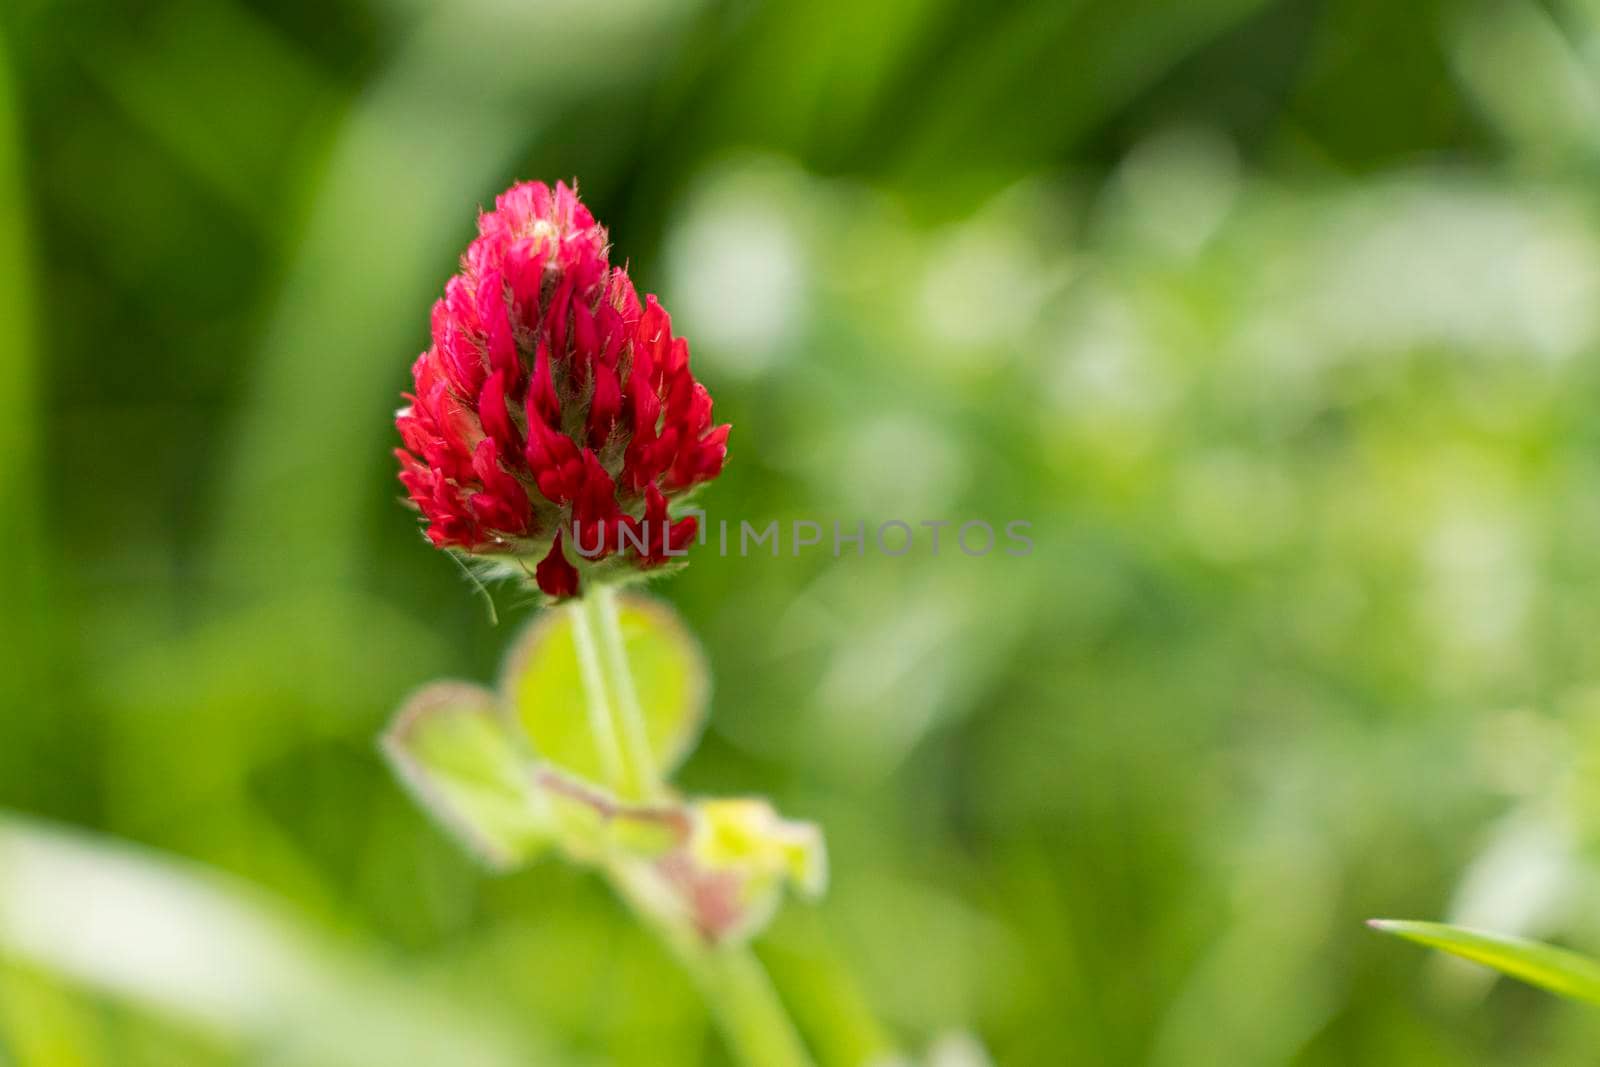 Macro photograph admiring the conically-shaped flower of the crimson clover, also known as Italian clover. Photo location: Tyne and Wear, England, UK.